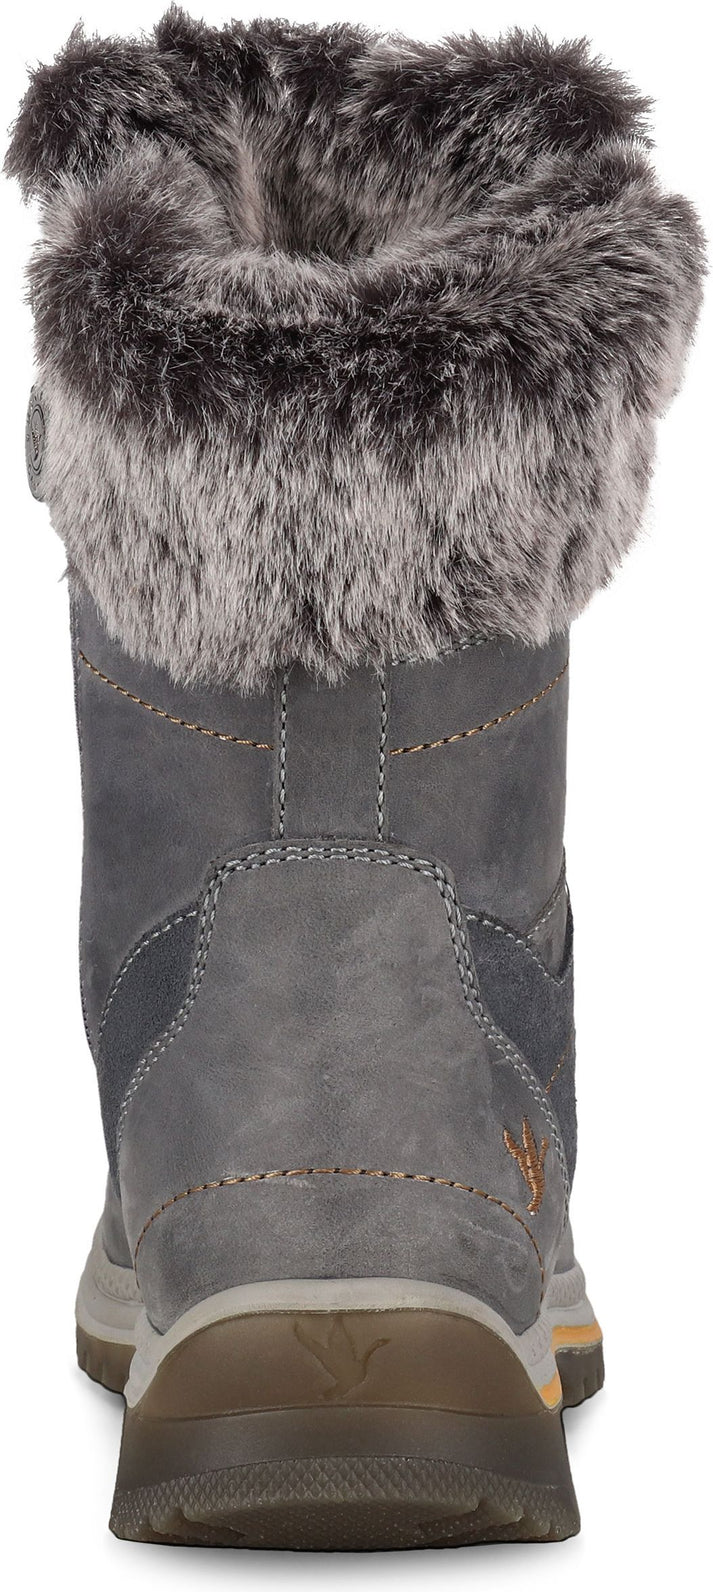 Santana Canada Boots Milly Leather Grey Mustard